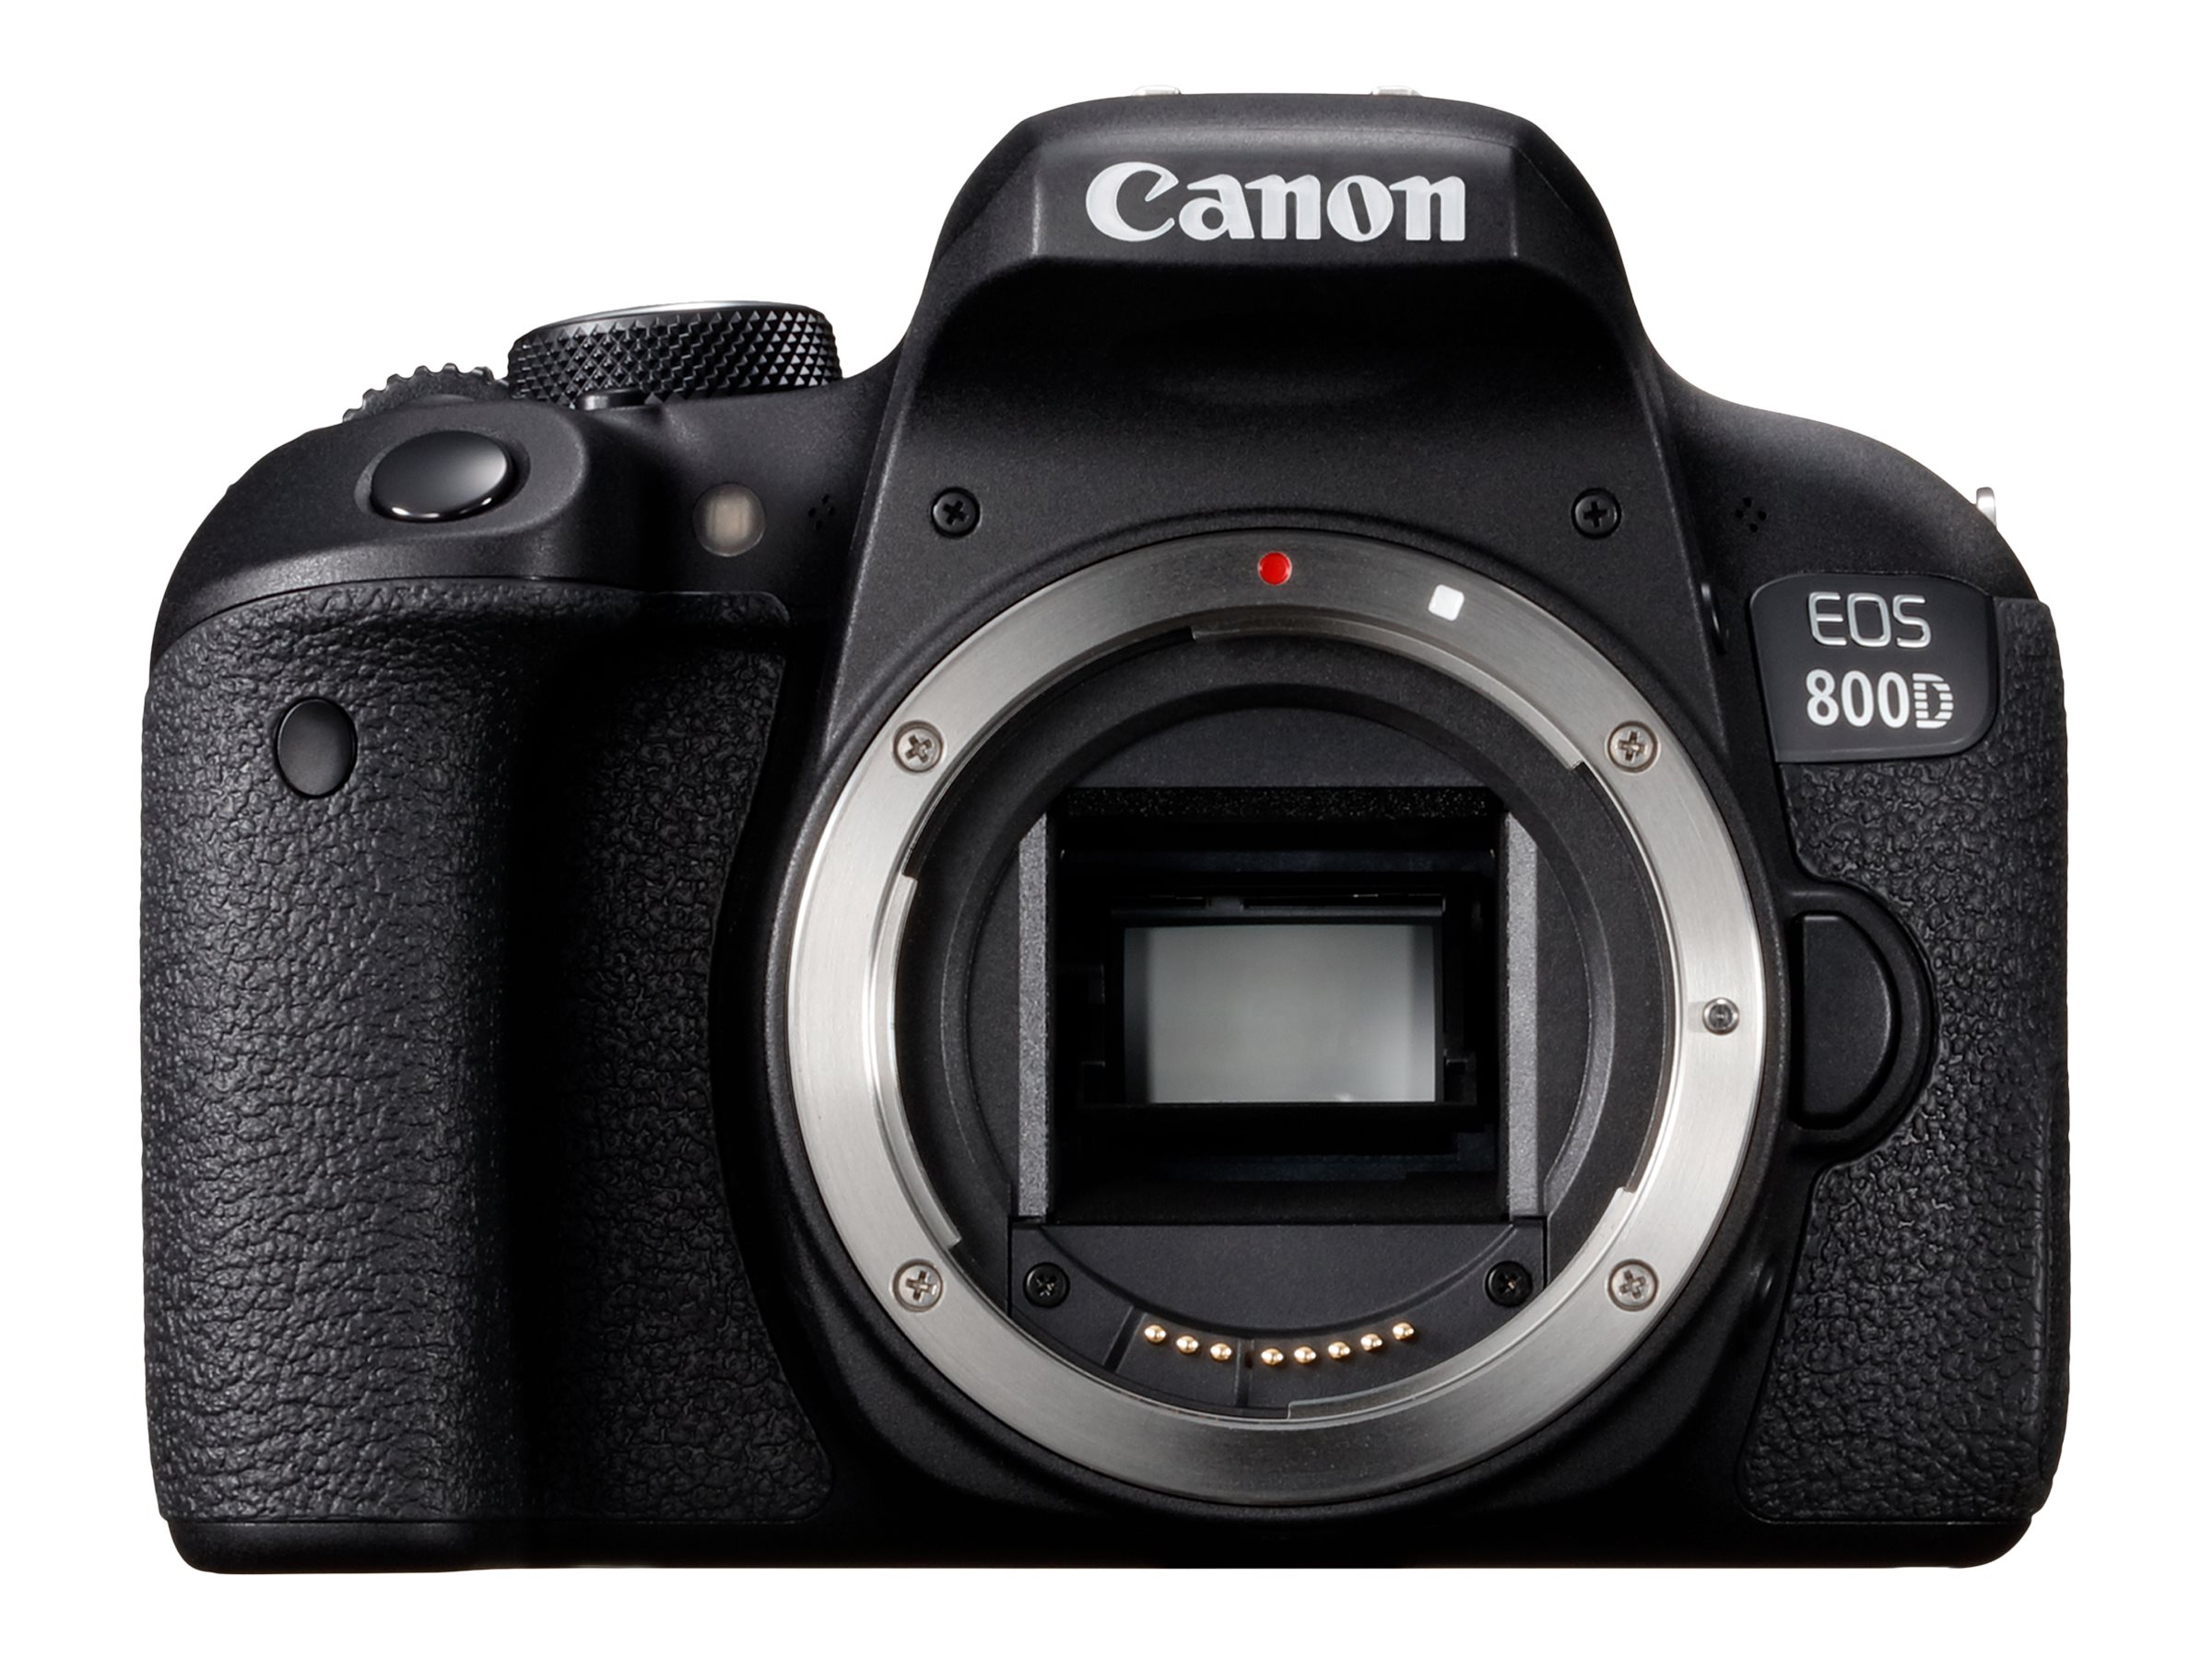 Canon eos 250d • Compare (16 products) see prices »